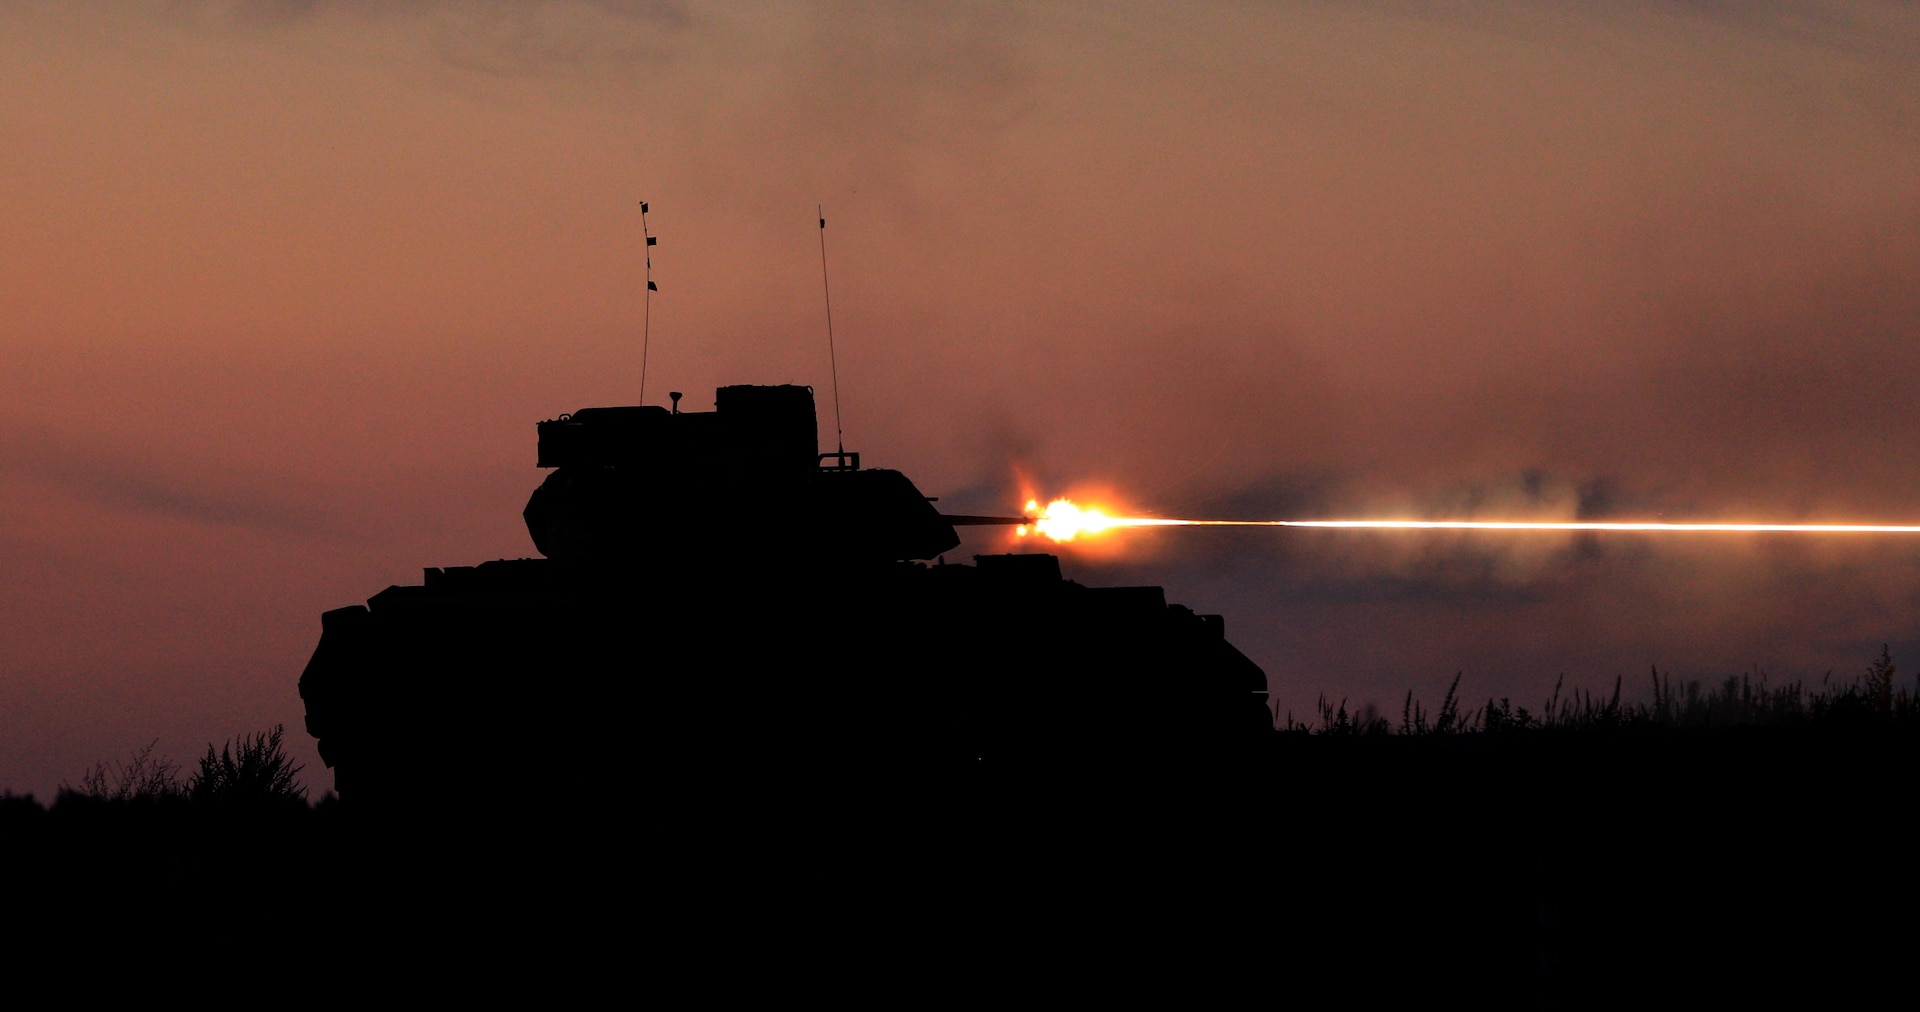 U.S. Army Soldiers with 1st Battalion, 8th Cavalry Regiment, 1st Cavalry Division, supporting 4th Infantry Division, conduct M2A3 Bradley fighting vehicle night live-fire qualification at Pabrade Training Area, Lithuania, Aug. 8. The 4th Inf. Div.'s mission in Europe is to engage in multinational training and exercises across the continent, working alongside NATO allies and regional security partners to provide combat-credible forces to V Corps, America’s forward deployed corps in Europe. (U.S. Army photo by Sgt. Cesar Salazar Jr.)